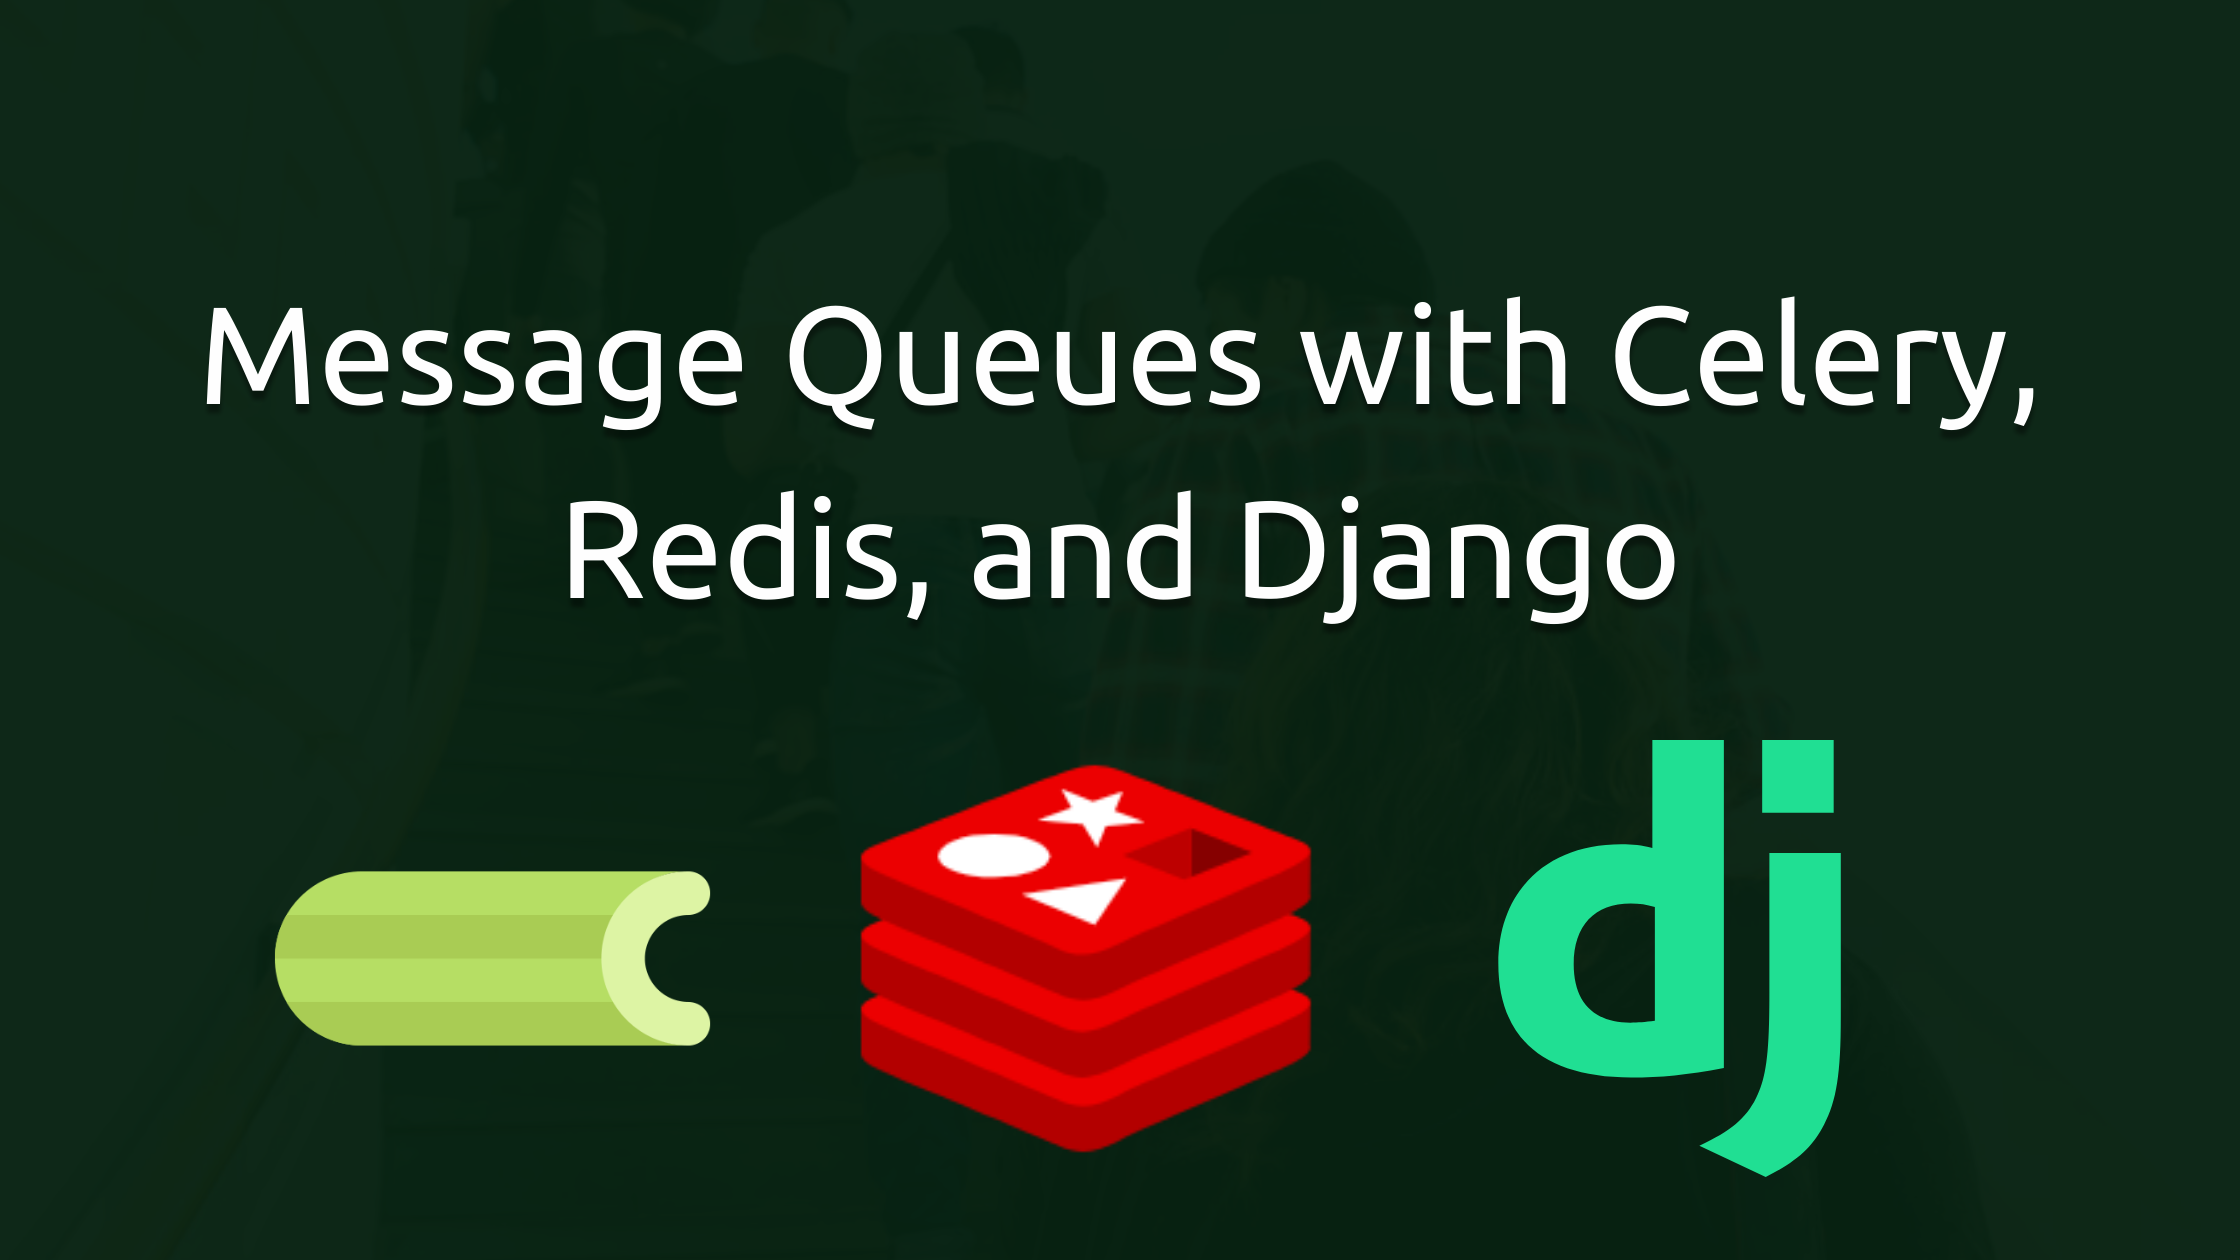 Message Queues with Celery, Redis, and Django